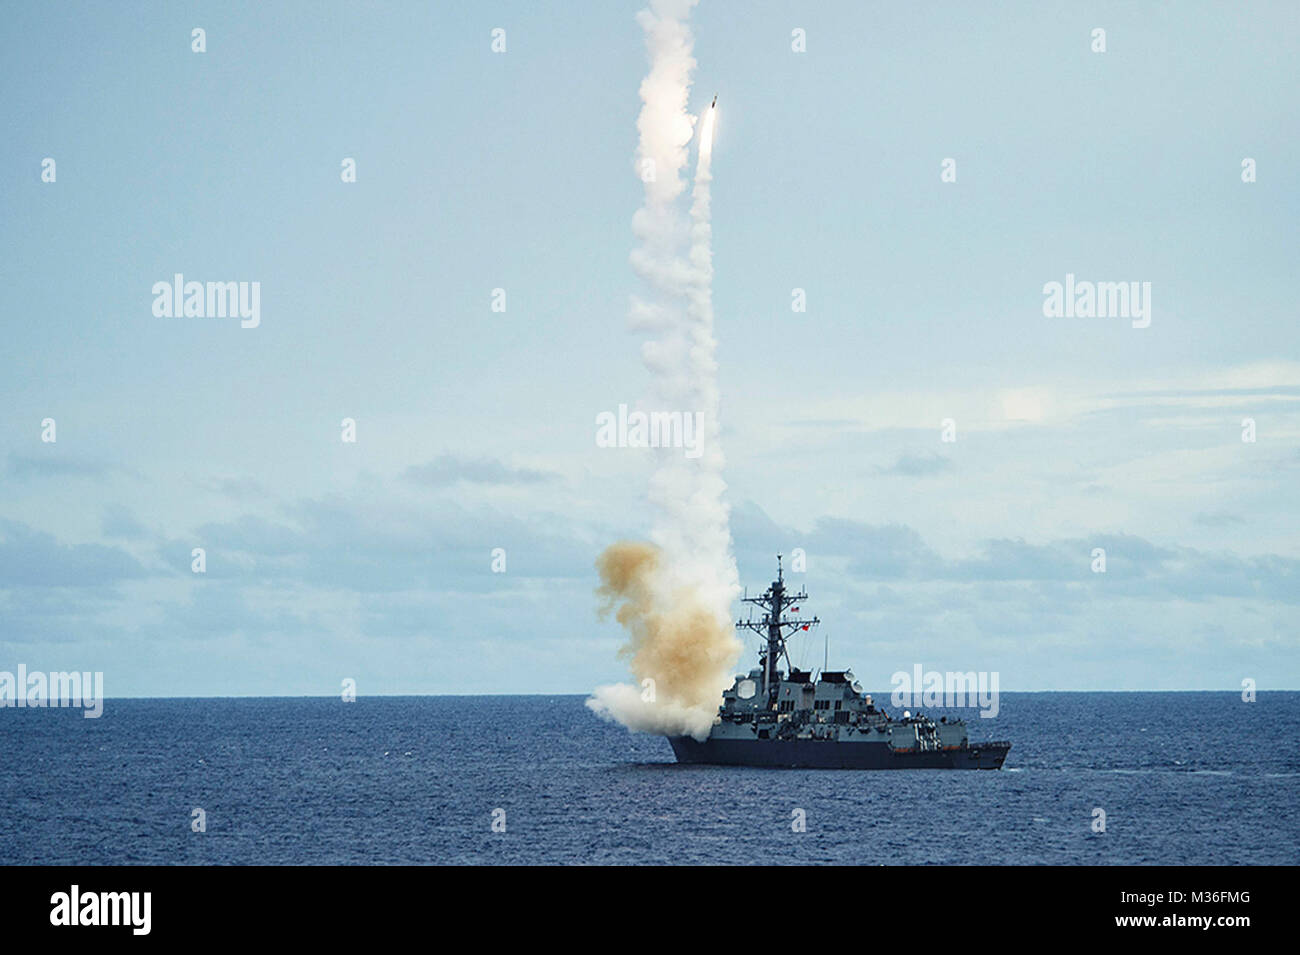 160919-N-XQ474-076 PHILIPPINE SEA (Sept. 19, 2016) The Arleigh Burke-class guided-missile destroyer USS McCampbell (DDG 85) fires a standard missile (SM 2) at a target drone as part of a surface-to-air-missile exercise (SAMEX) during Valiant Shield 2016. Valiant Shield is a biennial, U.S. only, field-training exercise with a focus on integration of joint training among U.S. forces. This is the sixth exercise in the Valiant Shield series that began in 2006. McCampbell is on patrol with Carrier Strike Group Five (CSG 5) in the Philippine Sea supporting security and stability in the Indo-Asia-Pac Stock Photo